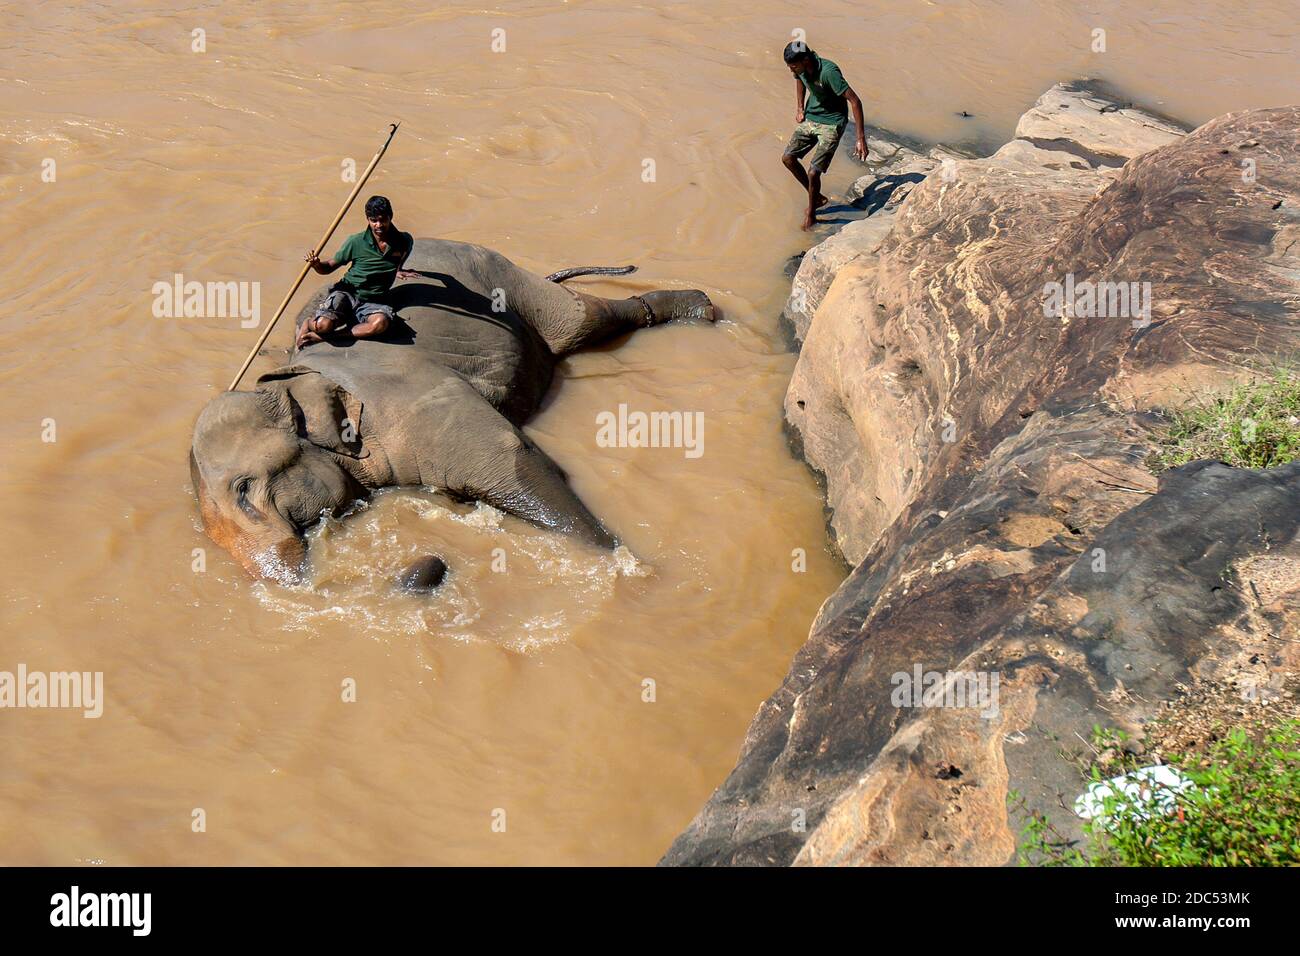 An elephant from the Pinnawala Elephant Orphanage bathes in the Maha Oya River in Sri Lanka. The elephants are taken twice daily to the river to bathe Stock Photo